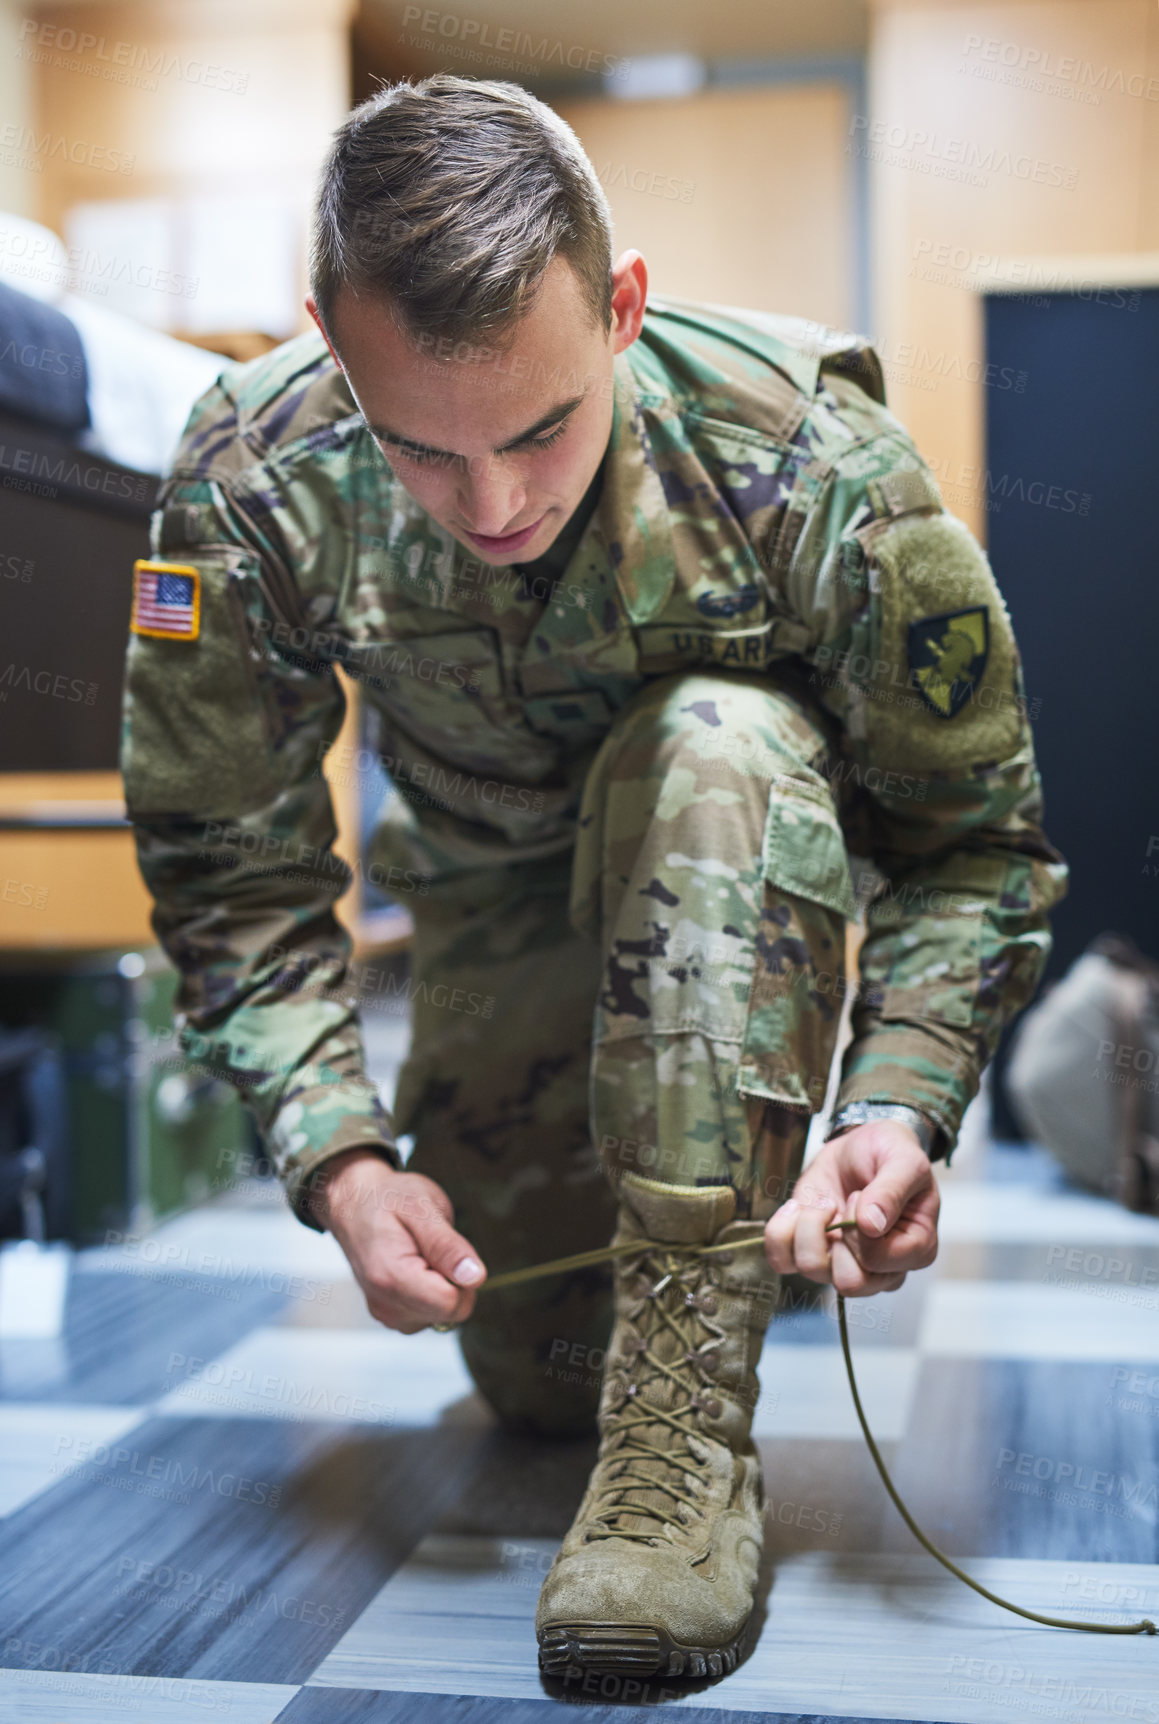 Buy stock photo Shot of a young soldier tying his boot shoelaces in the dorms of a military academy